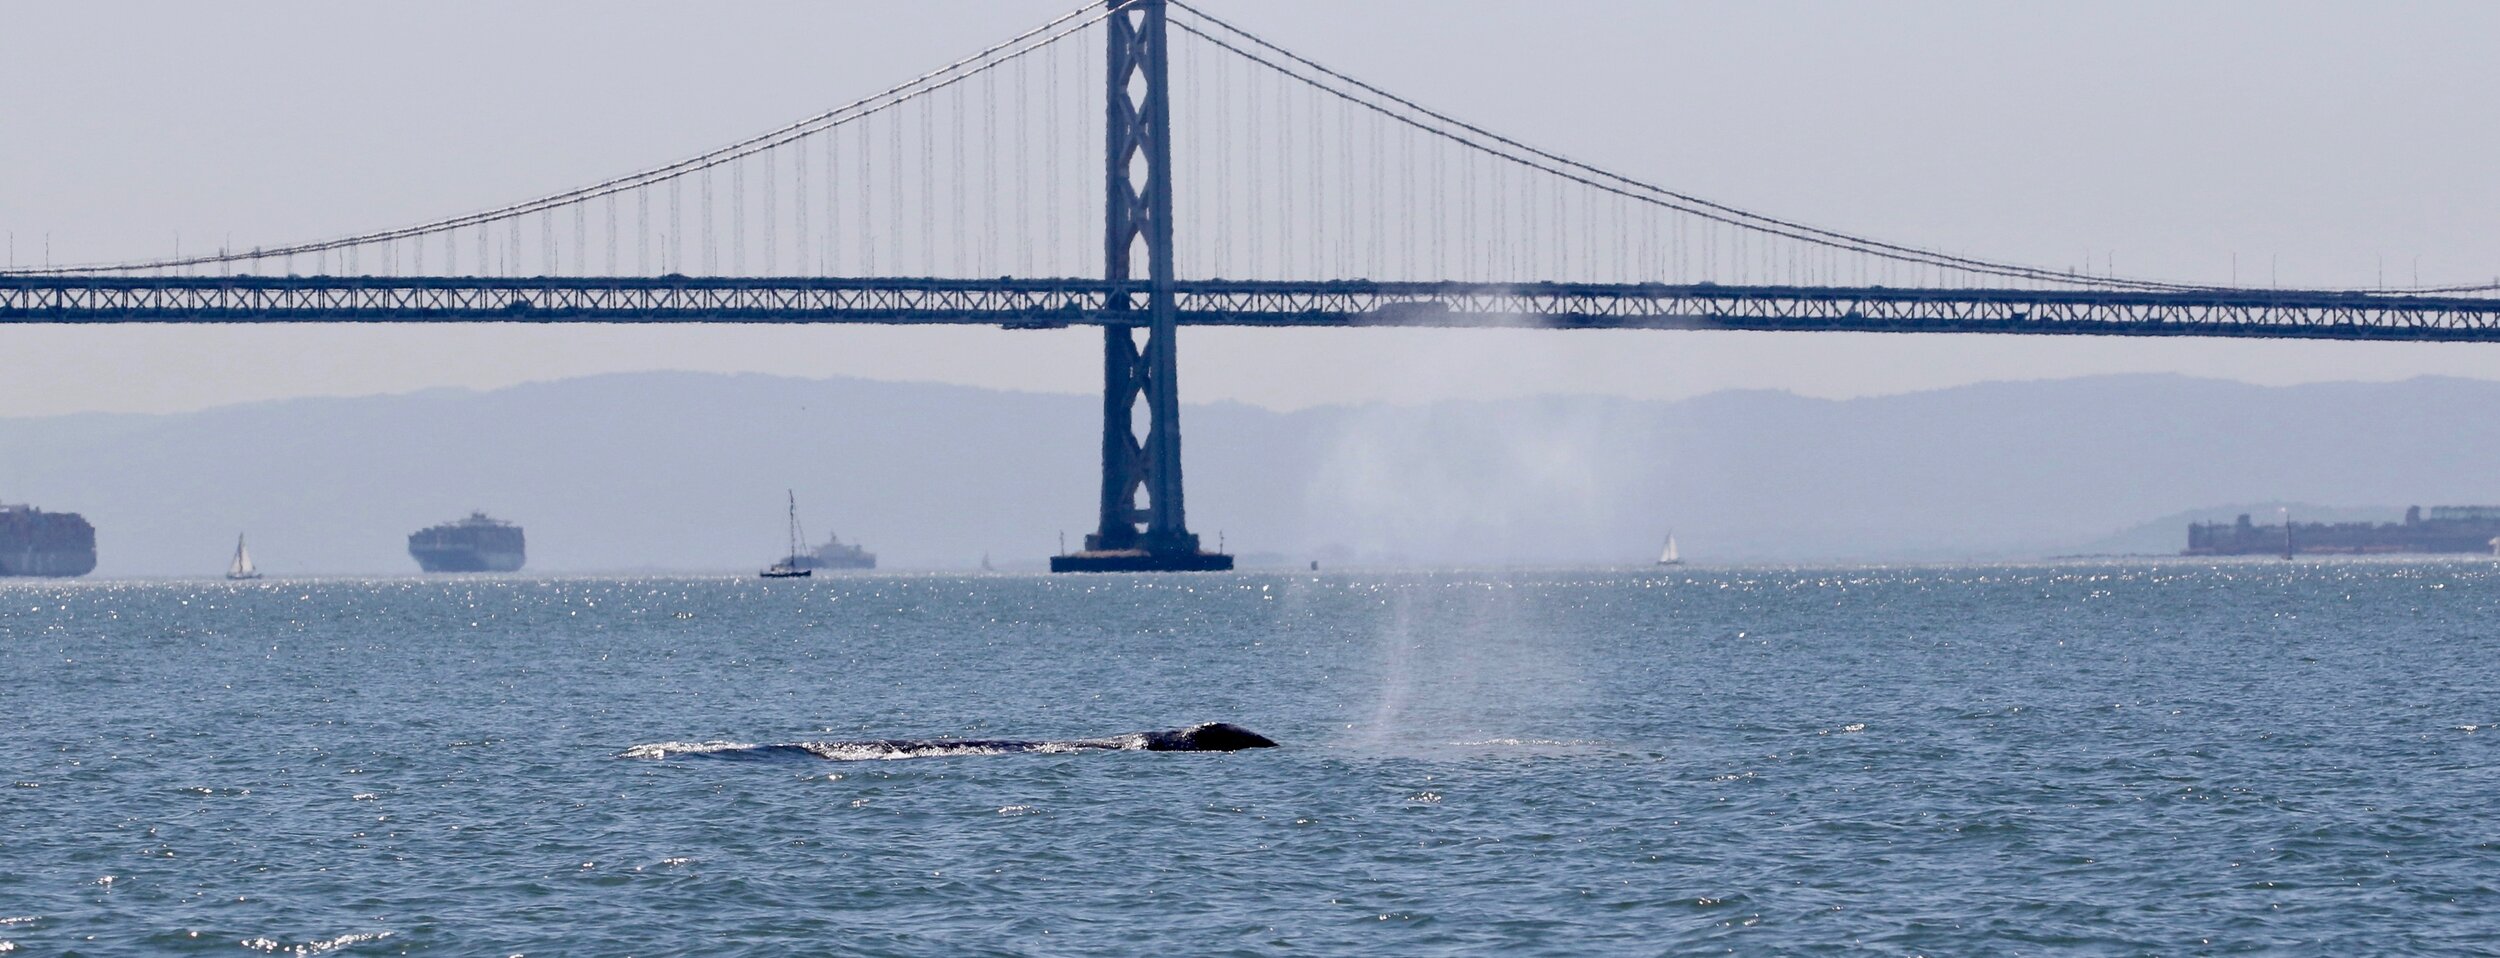 Gray whale in San Francisco Bay, photo by Tim Markowitz